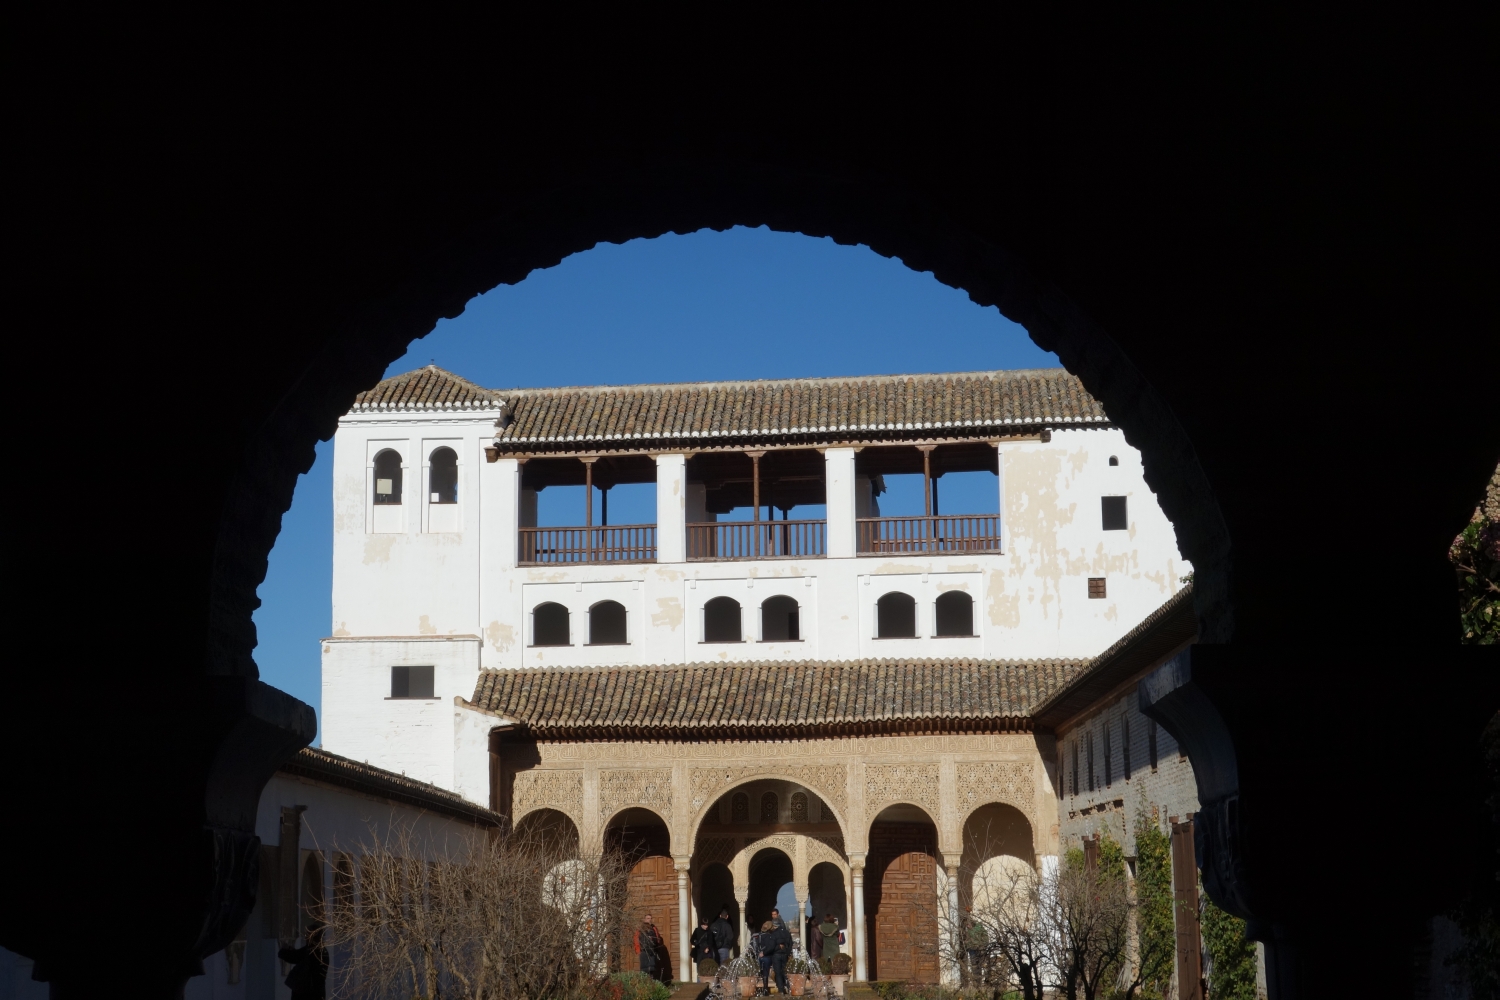 Acequía Court, view through archway to north pavilion